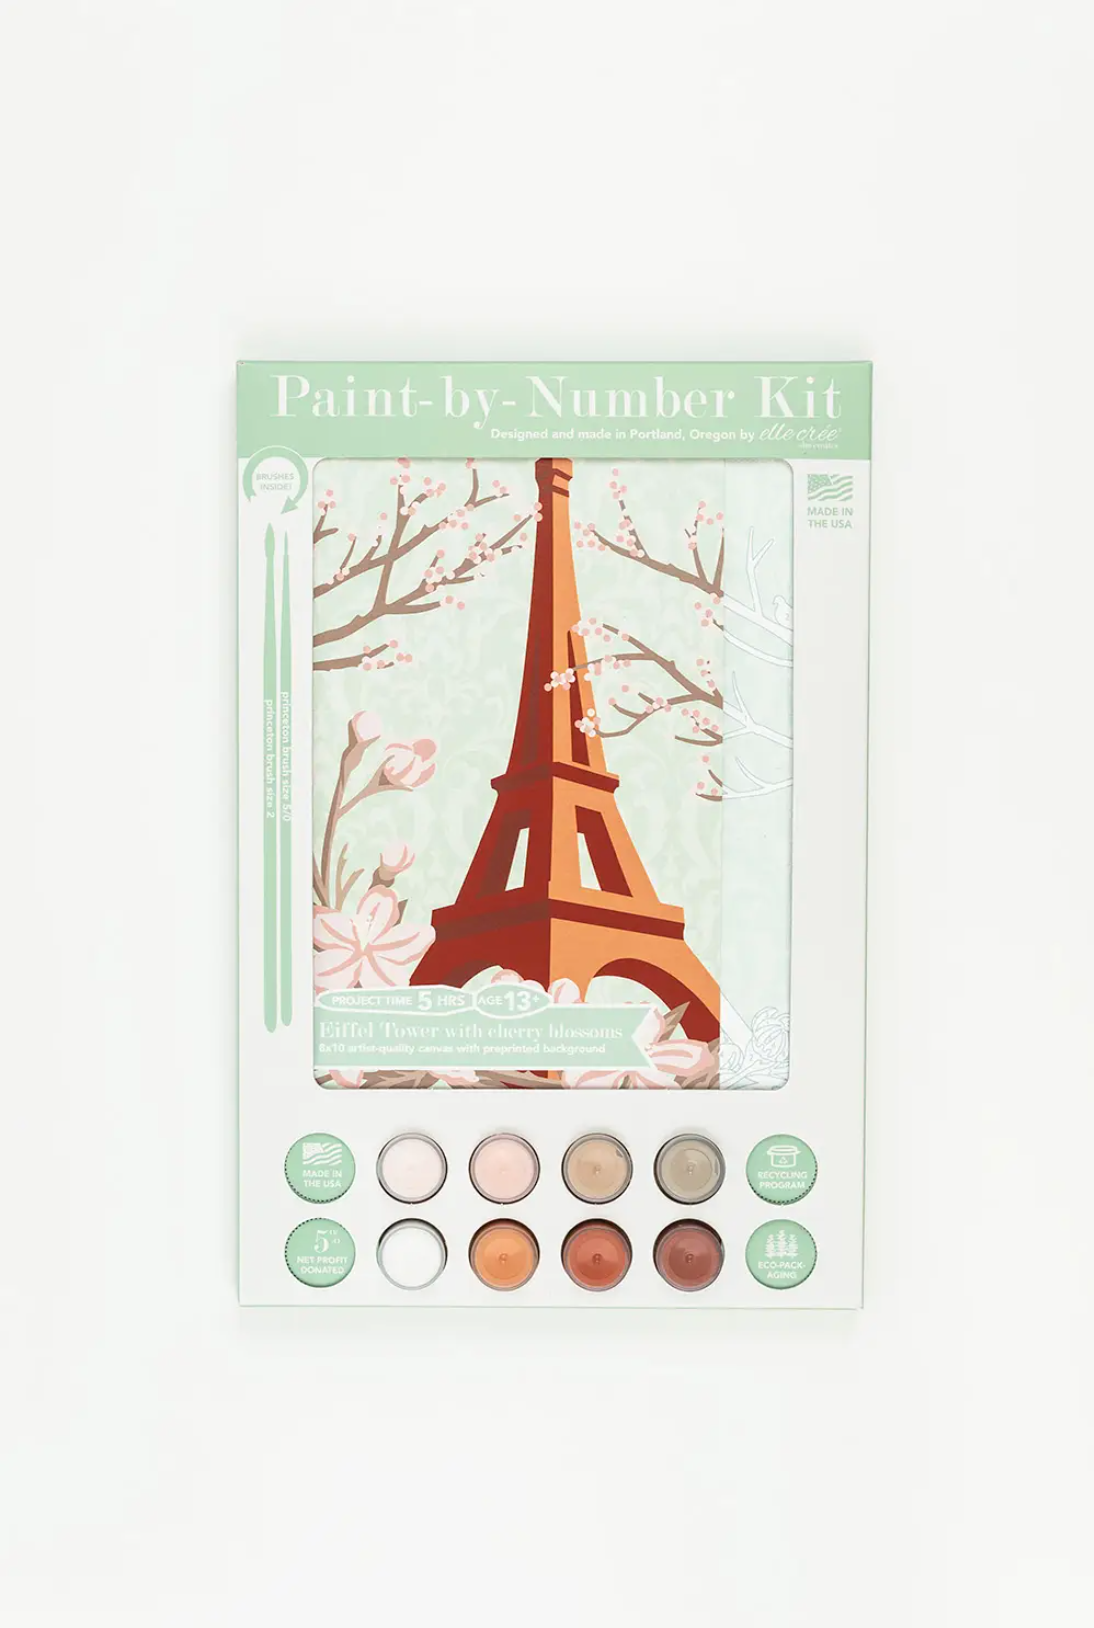 Paint-by-Number Kits – Sonia's Vokalized Kreations